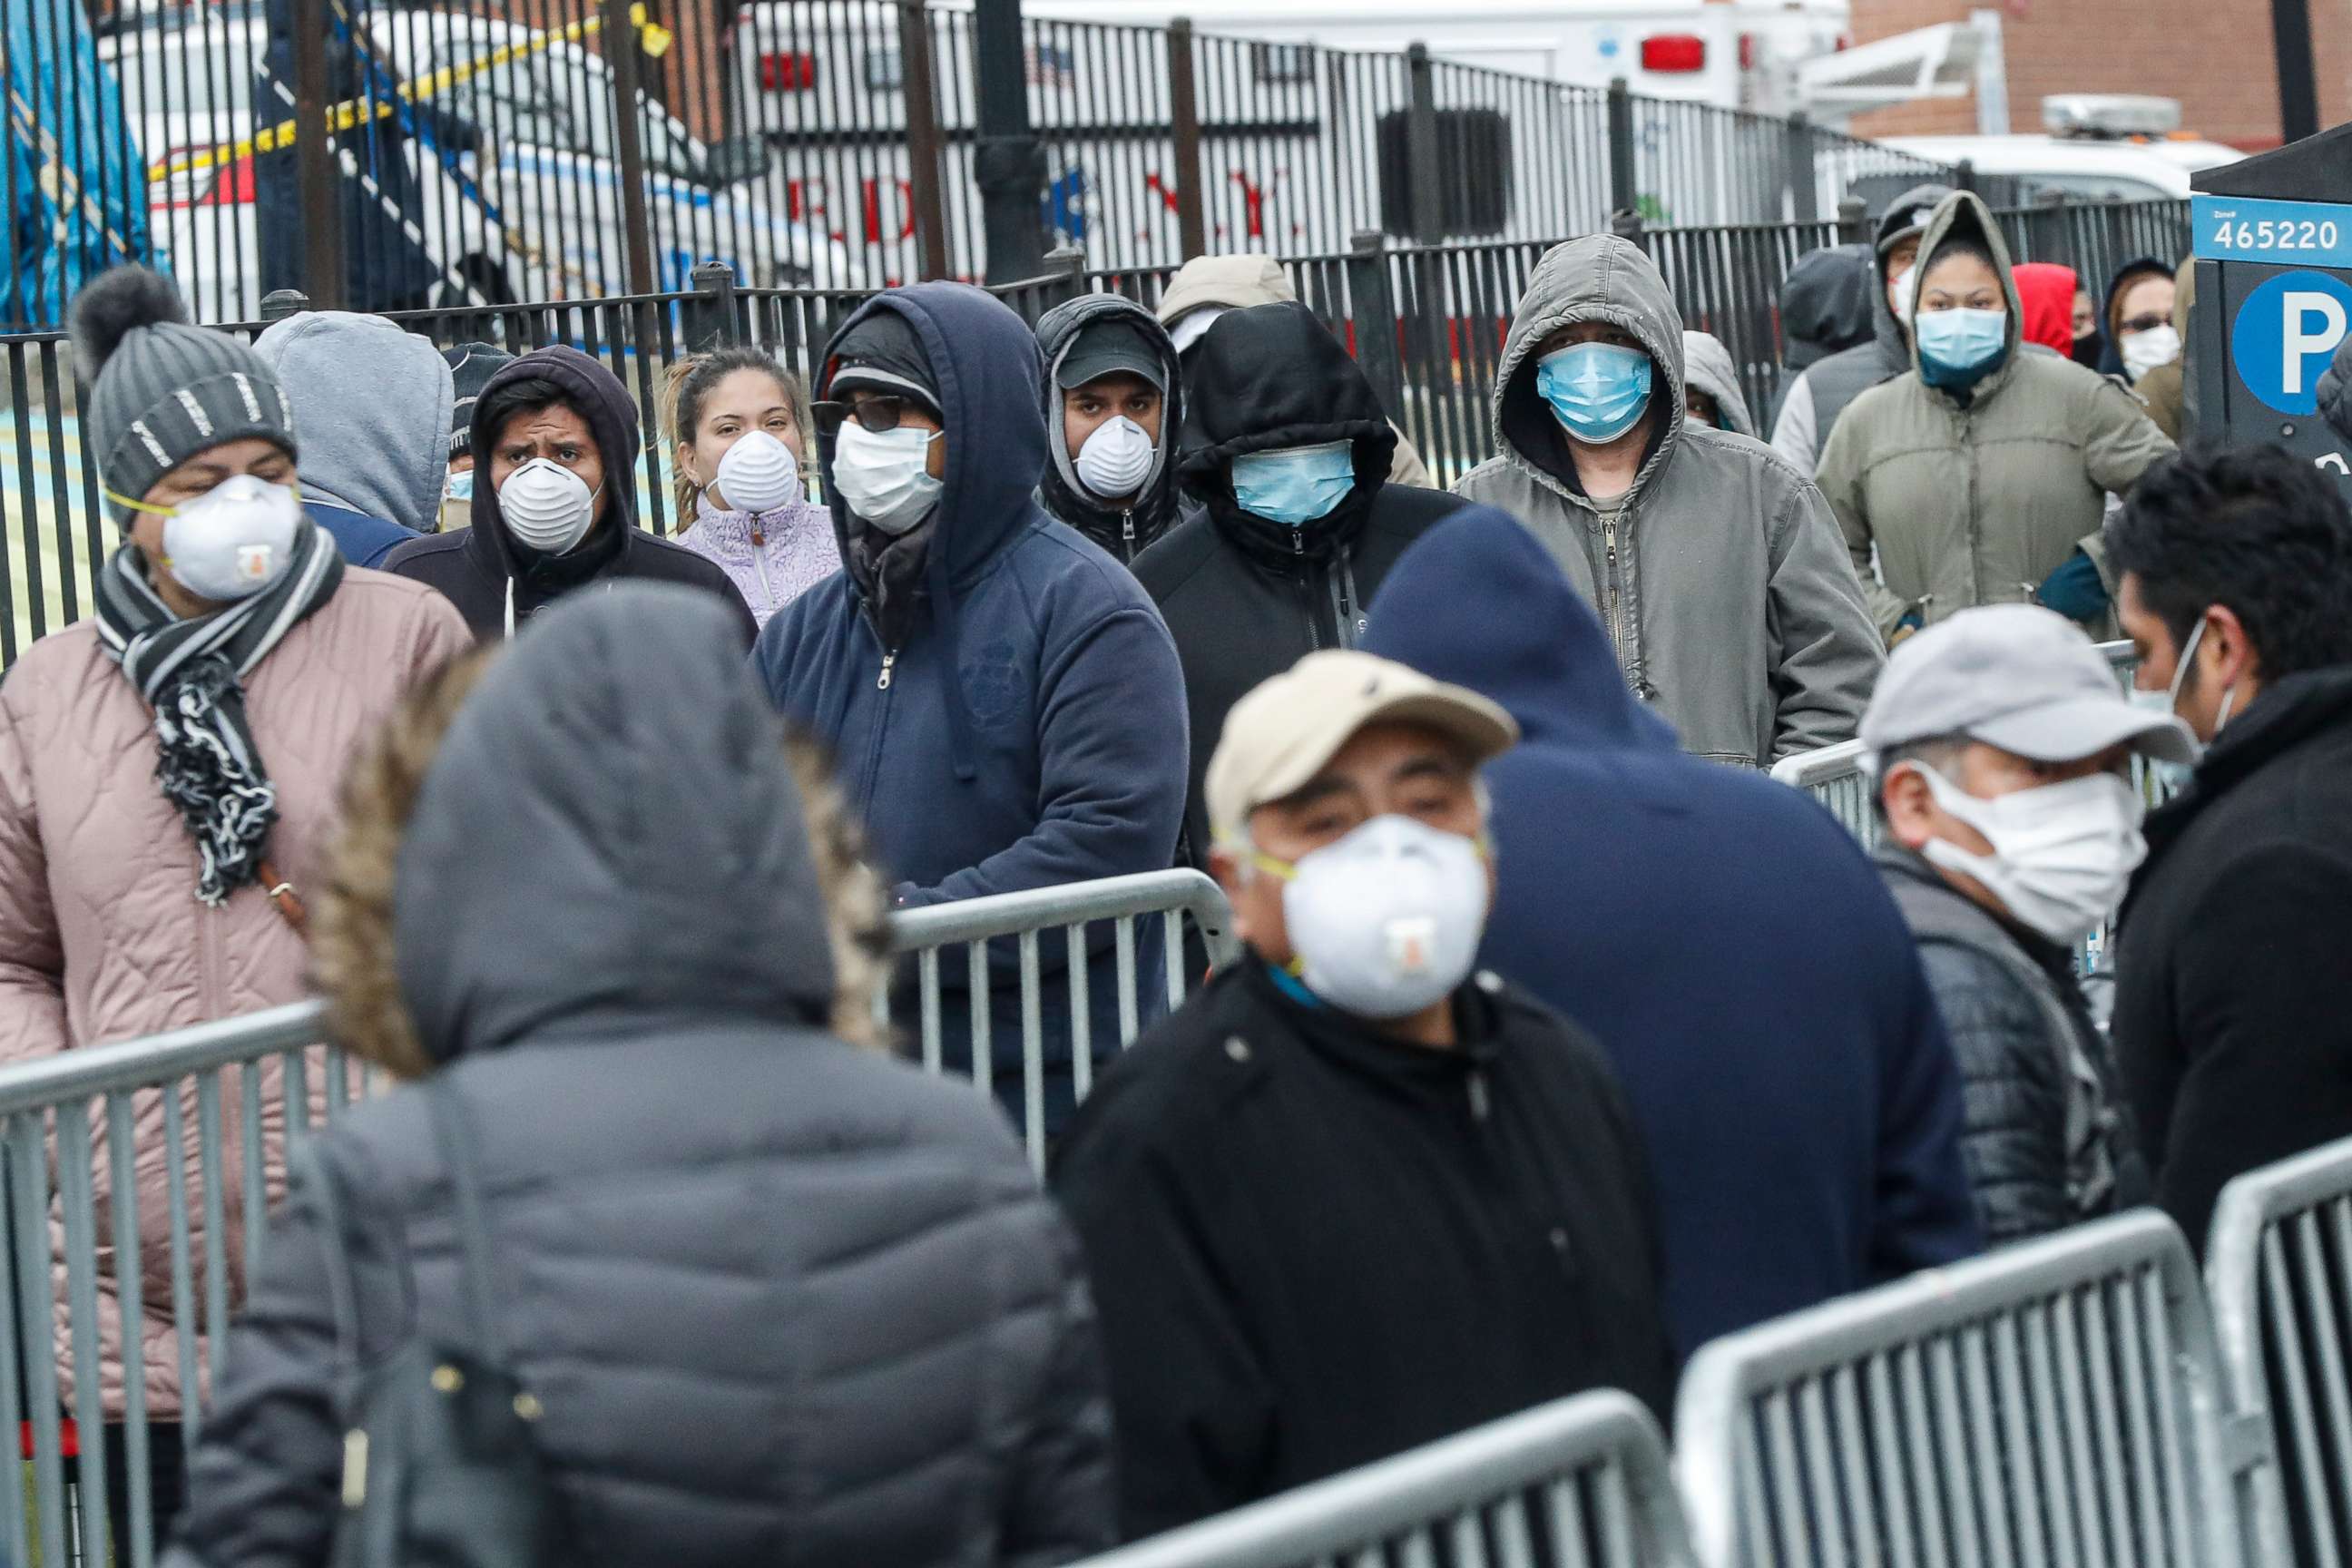 PHOTO: Patients wear personal protective equipment while maintaining social distancing as they wait in line for a COVID-19 test at Elmhurst Hospital Center, March 25, 2020, in New York.